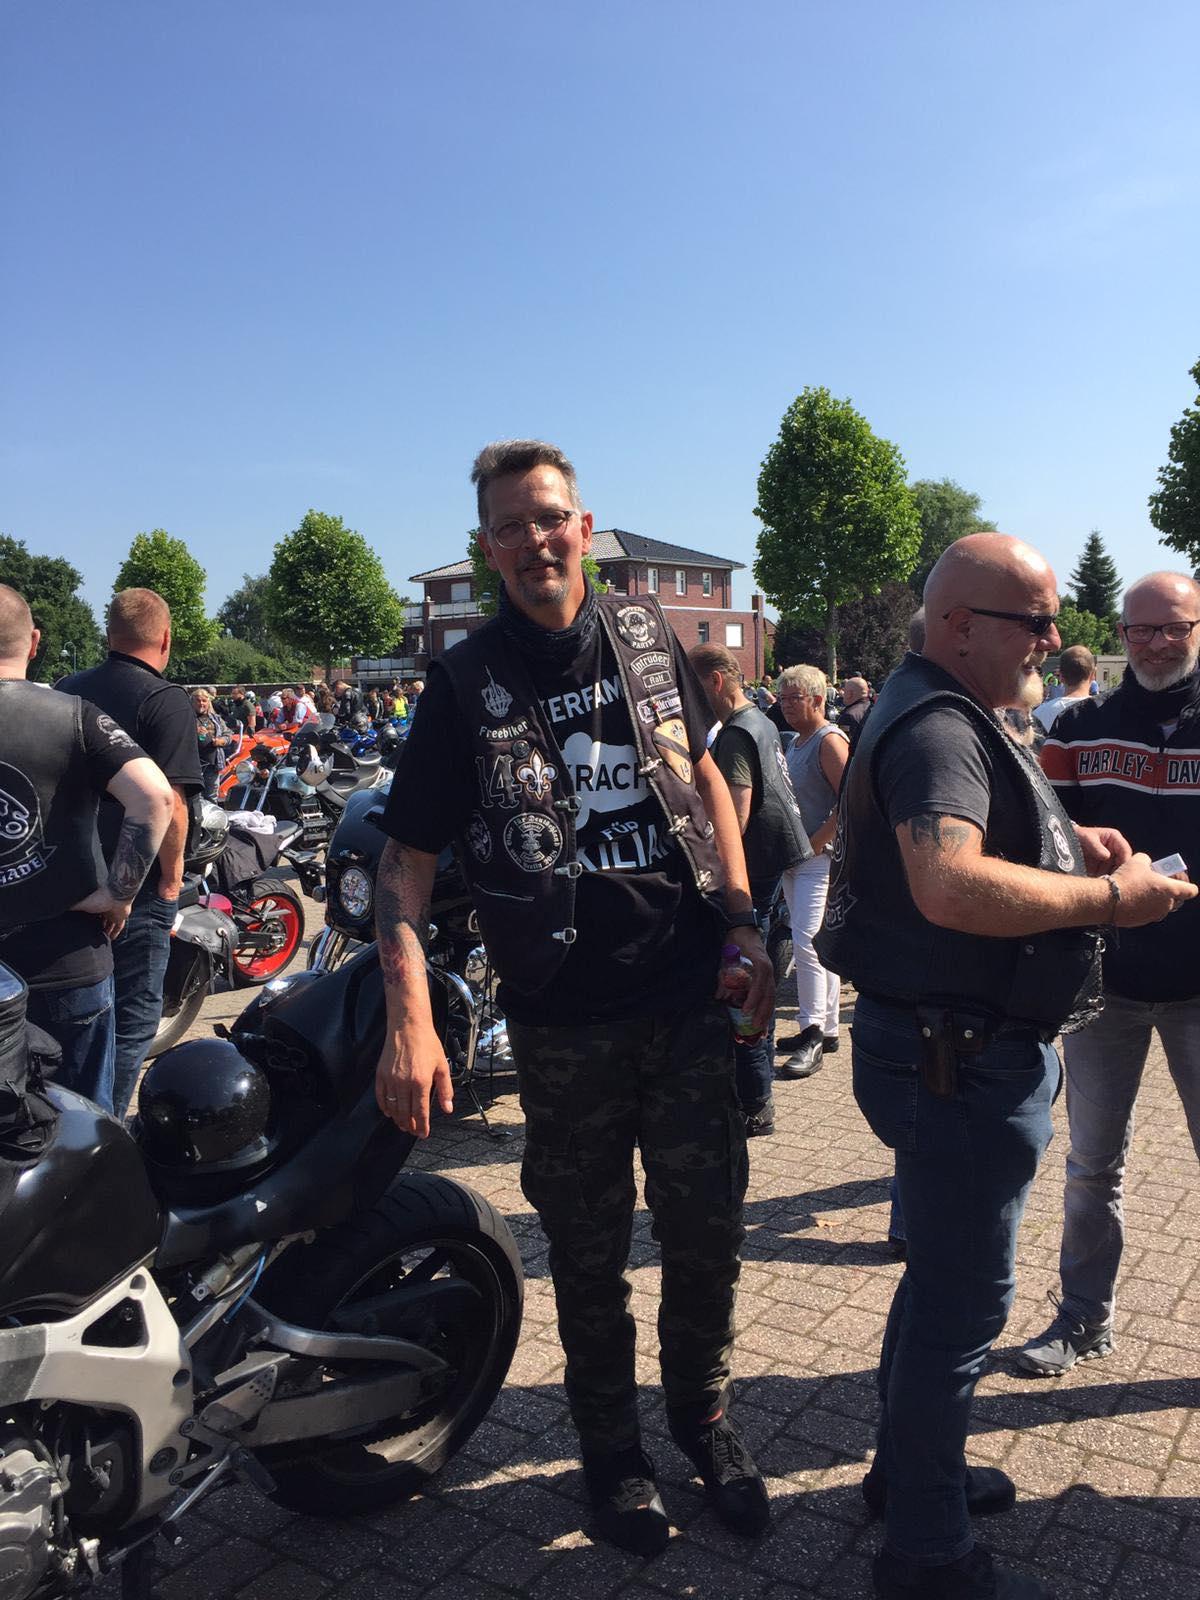 Ralf Pietsch, a biker who helped launch the campaign for Kilian. (Courtesy of <a href="https://www.facebook.com/profile.php?id=100010828298195">Ralf Pietsch</a>)